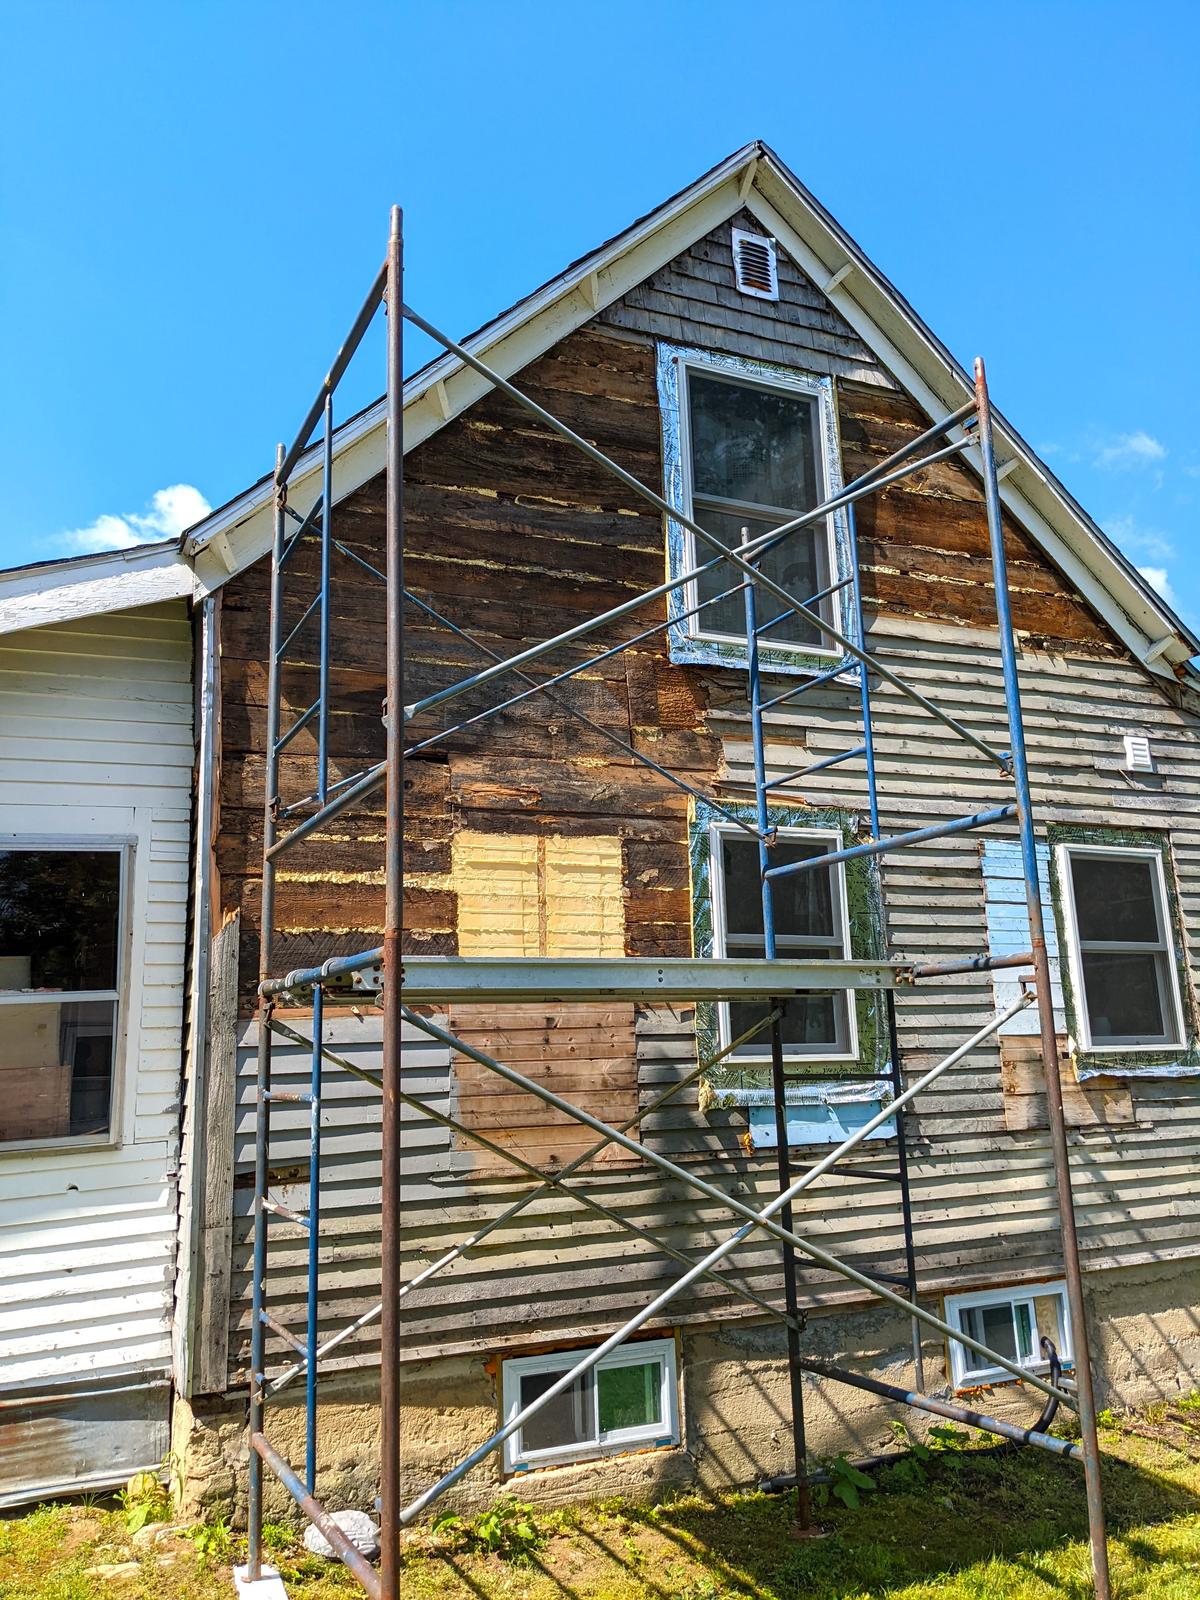 Safe pipe scaffolding is allowing these homeowners to remove old wood siding and install new vinyl siding themselves. They'll save many thousands of dollars. (Tim Carter/TNS)